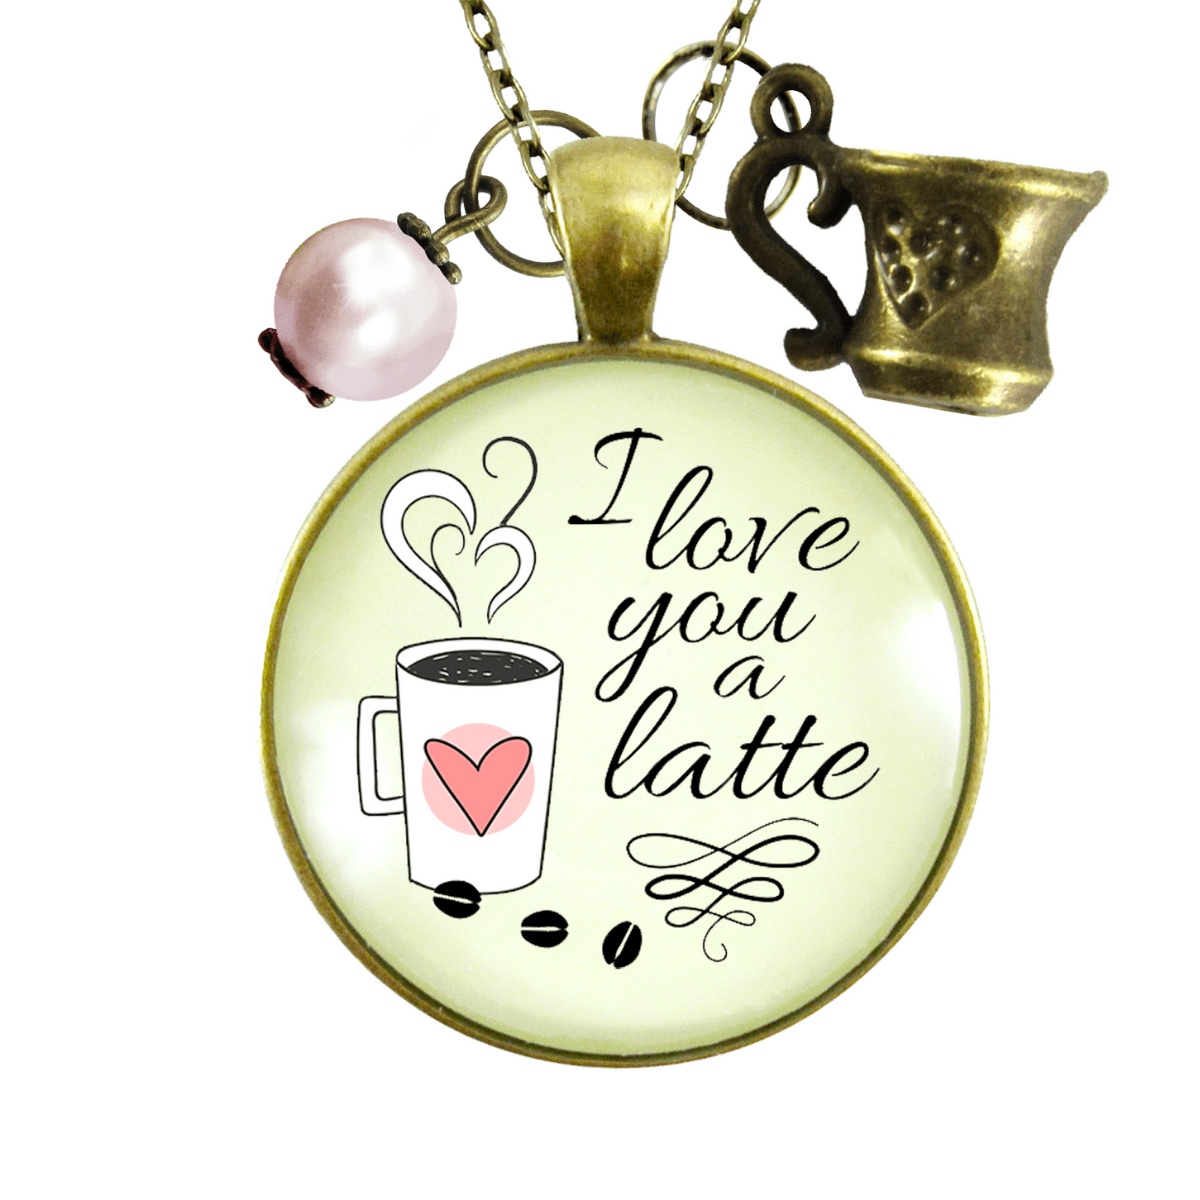 Gutsy Goodness Coffee Necklace Love You Latte Romantic Quote Caffeine Jewelry Gift - Gutsy Goodness;Coffee Necklace Love You Latte Romantic Quote Caffeine Jewelry Gift - Gutsy Goodness Handmade Jewelry Gifts